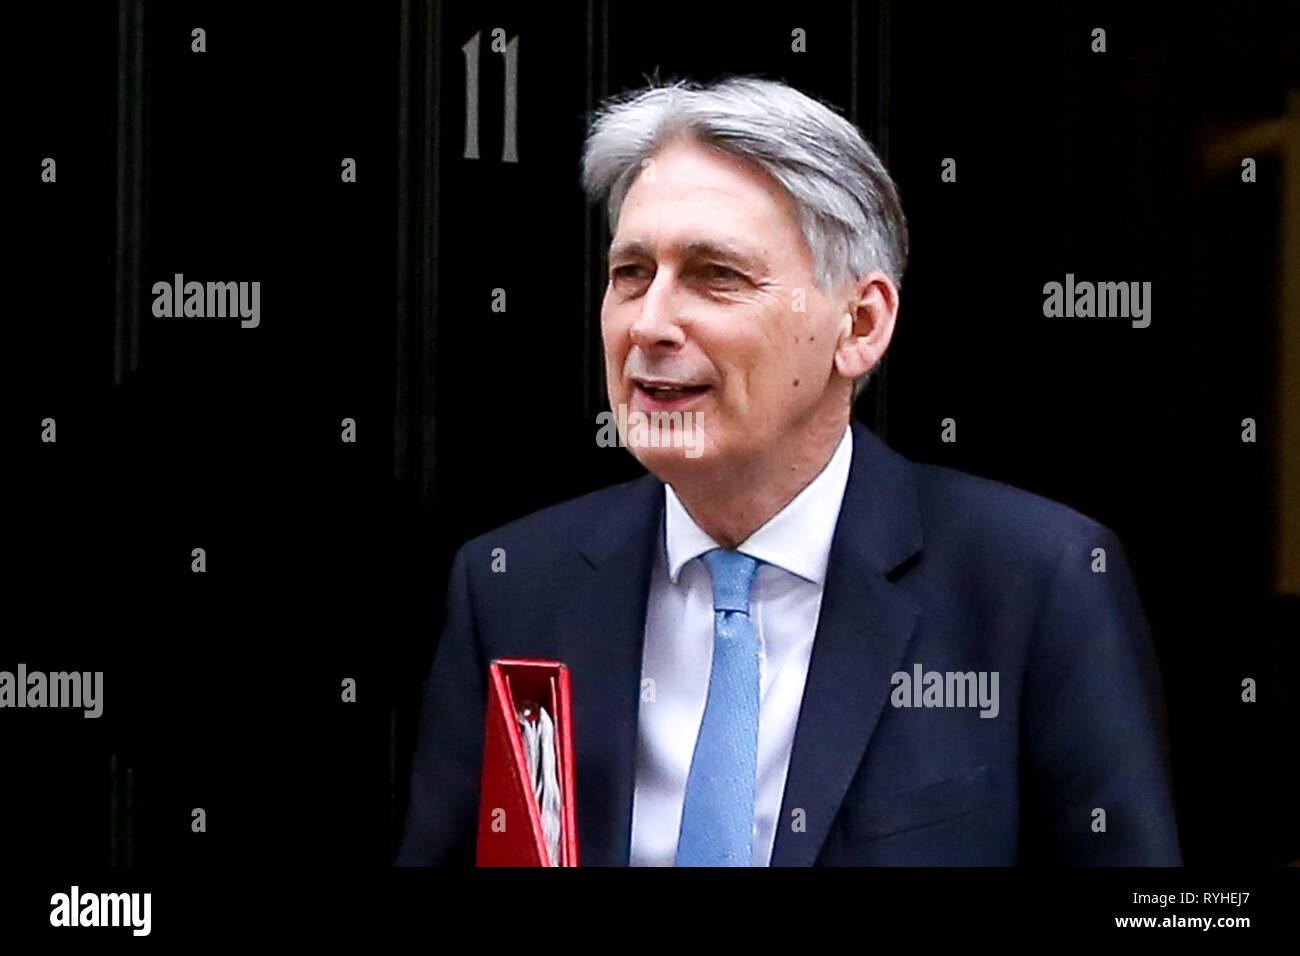 The Chancellor of the Exchequer Phillip Hammond is seen departing from No 11 Downing Street for House of Commons where he will announce the state of the British economy in his Spring Statement to the Parliament. Stock Photo